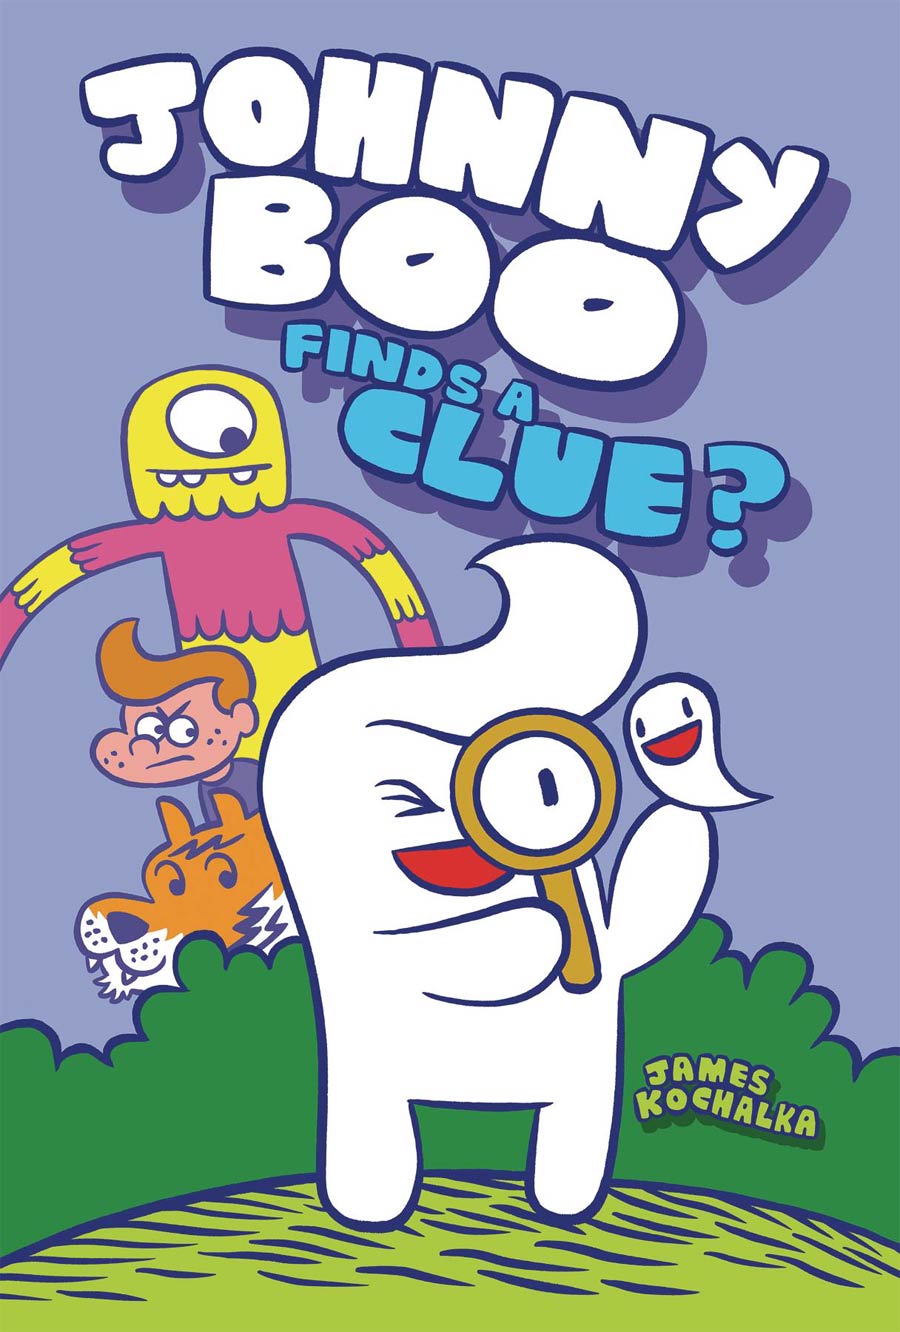 Johnny Boo Vol 11 Johnny Boo Finds A Clue HC